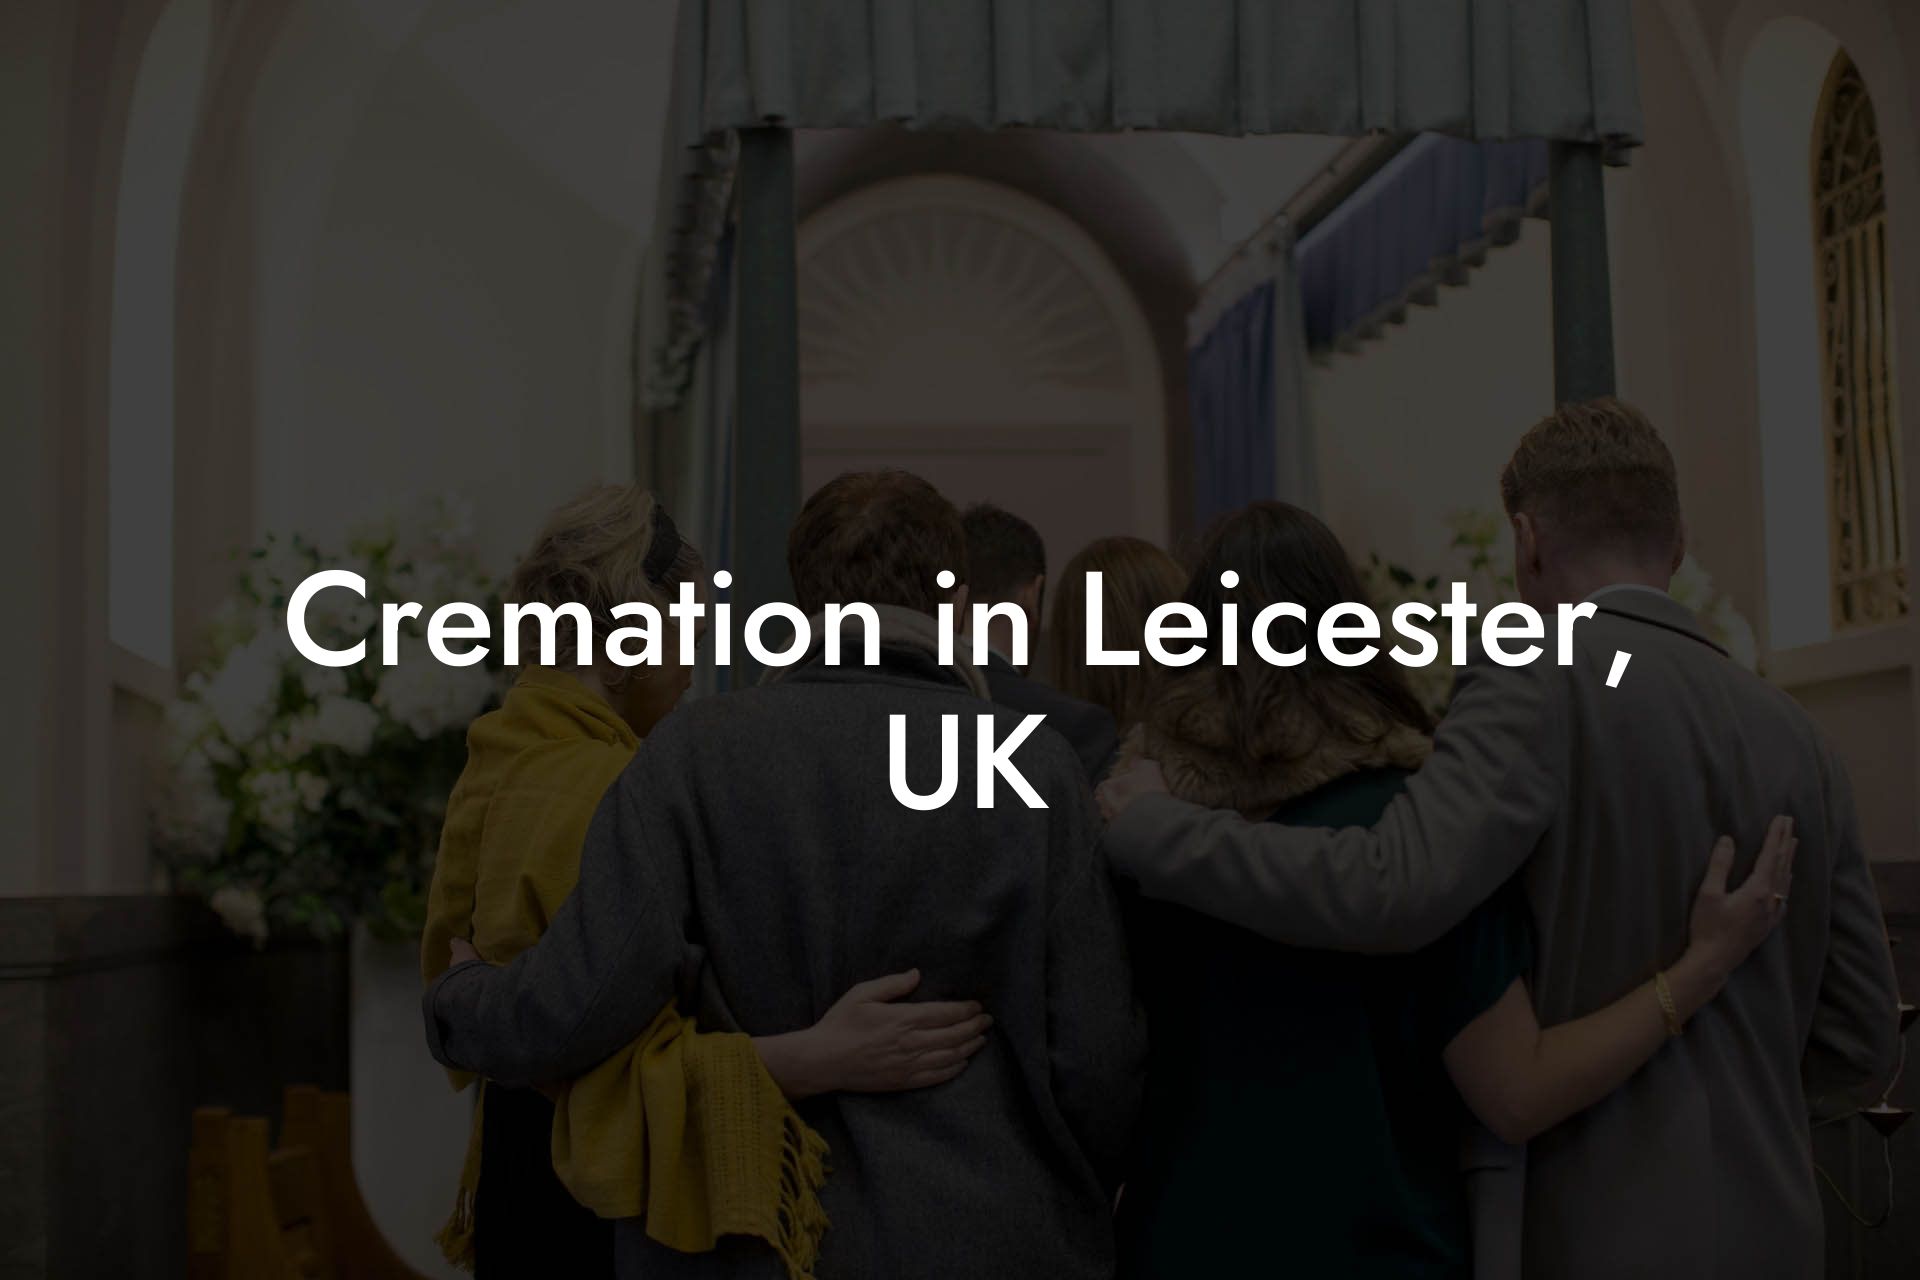 Cremation in Leicester, UK